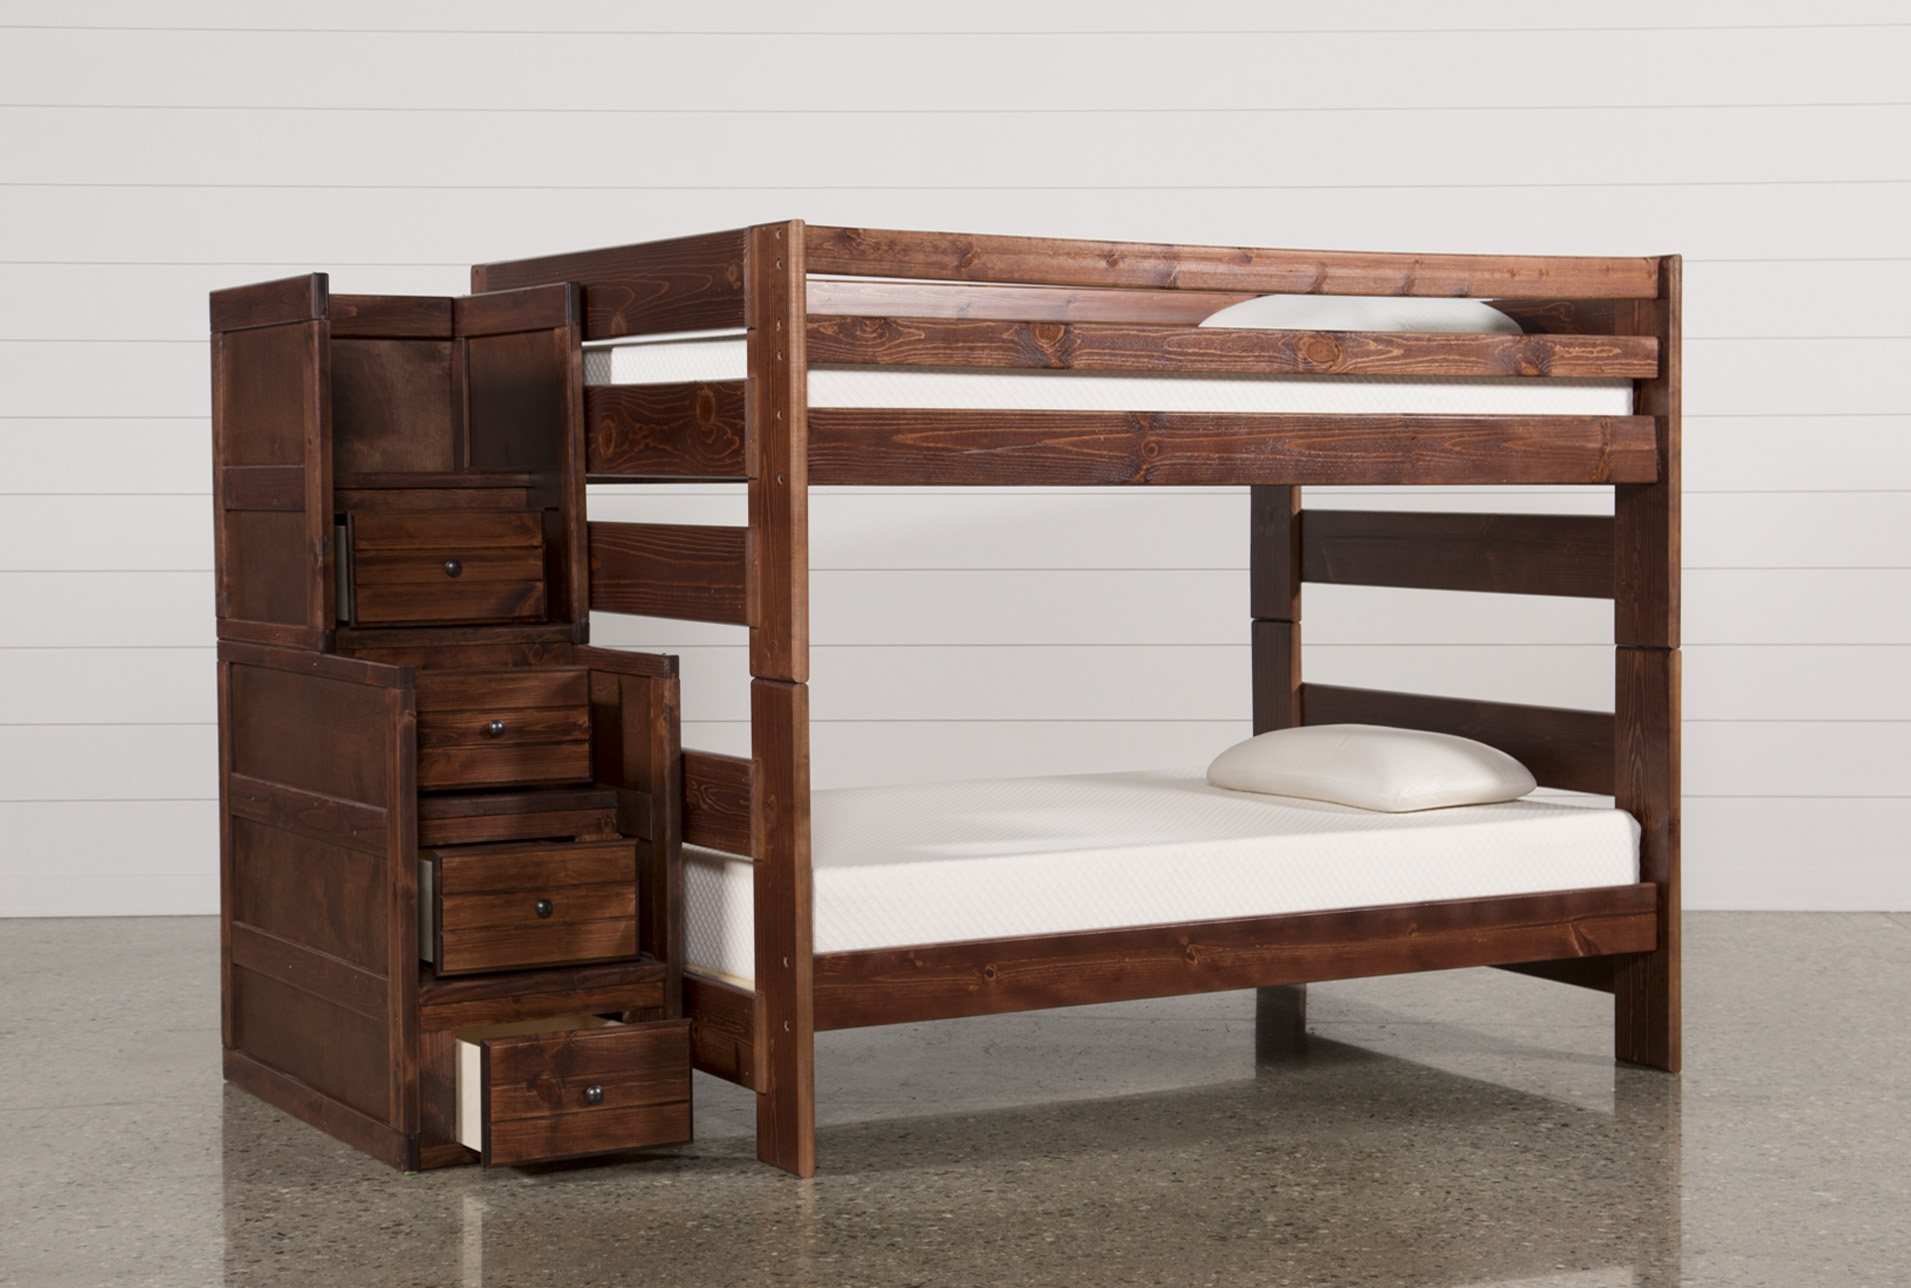 full bunk beds for adults